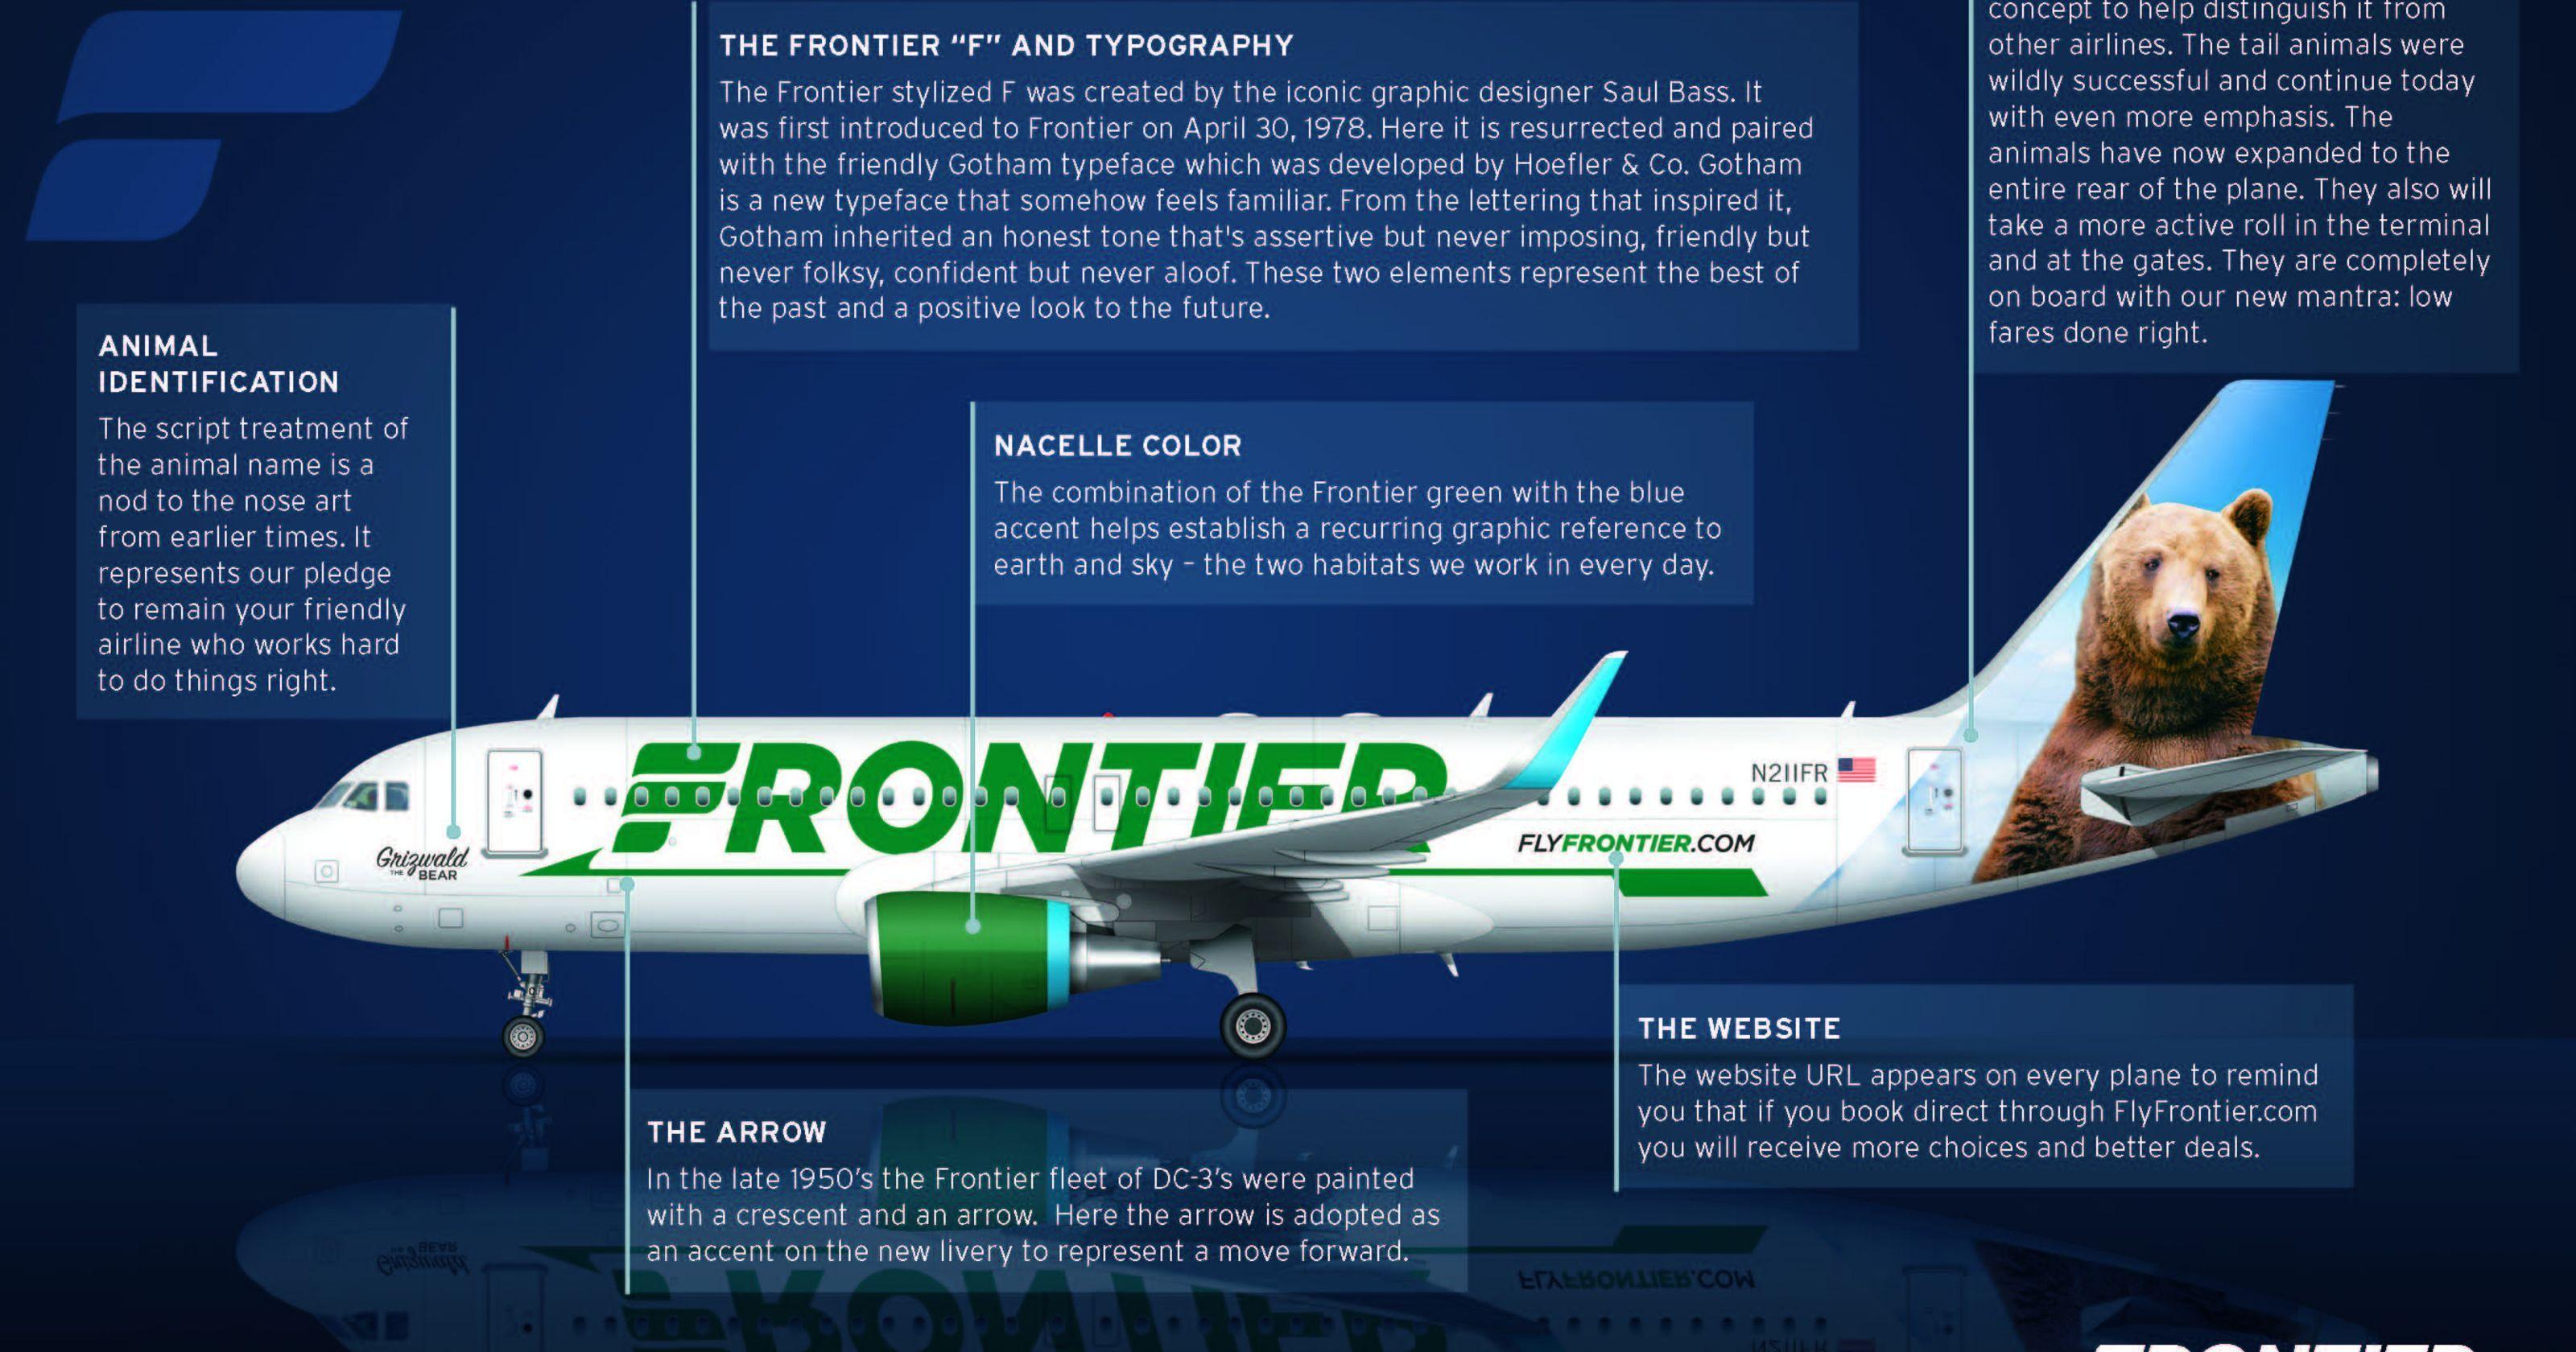 Green Airplane Logo - Frontier unveils new logo; CEO talks about airline's future